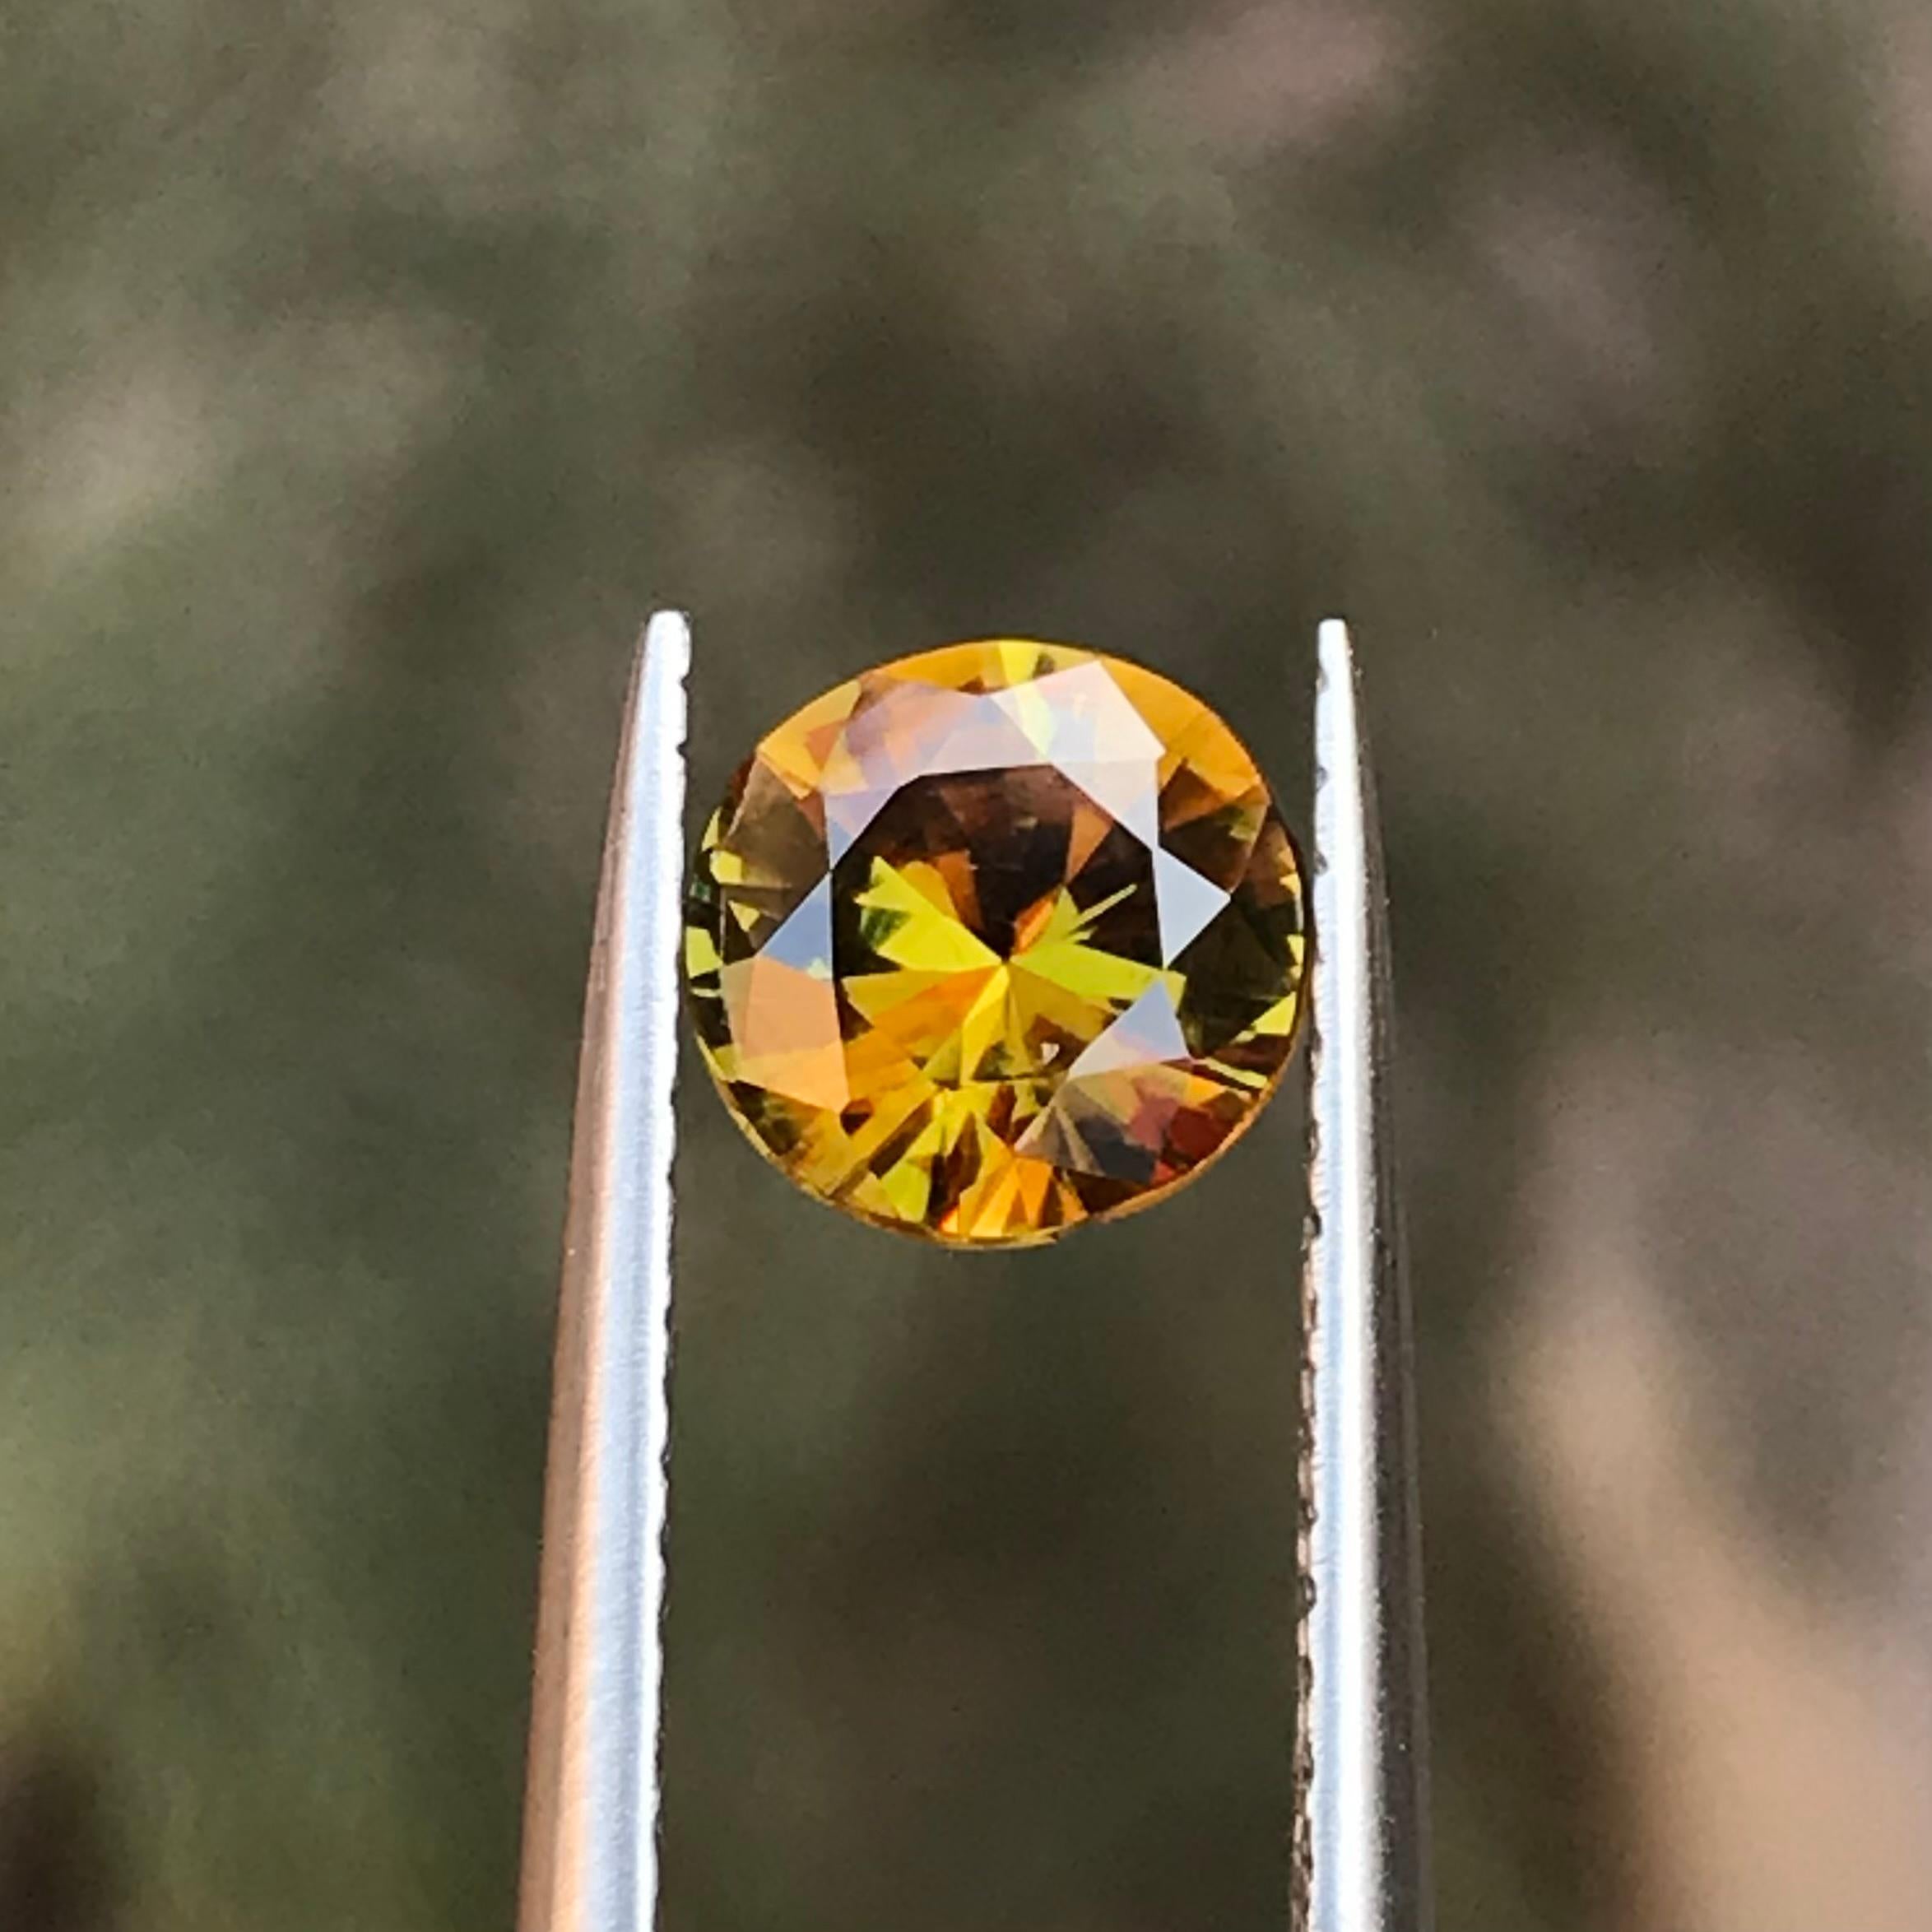 GEMSTONE TYPE: Sphene
PIECE(S): 1
WEIGHT: 0.75 Carats
SHAPE: Round Brilliant 
SIZE (MM): 6 x 6 x 3
COLOR: Deep Yellow
CLARITY: Approx Eye Clean
TREATMENT: None
ORIGIN: Africa
CERTIFICATE: On demand

This yellow 1.05 carat round brilliant cut natural